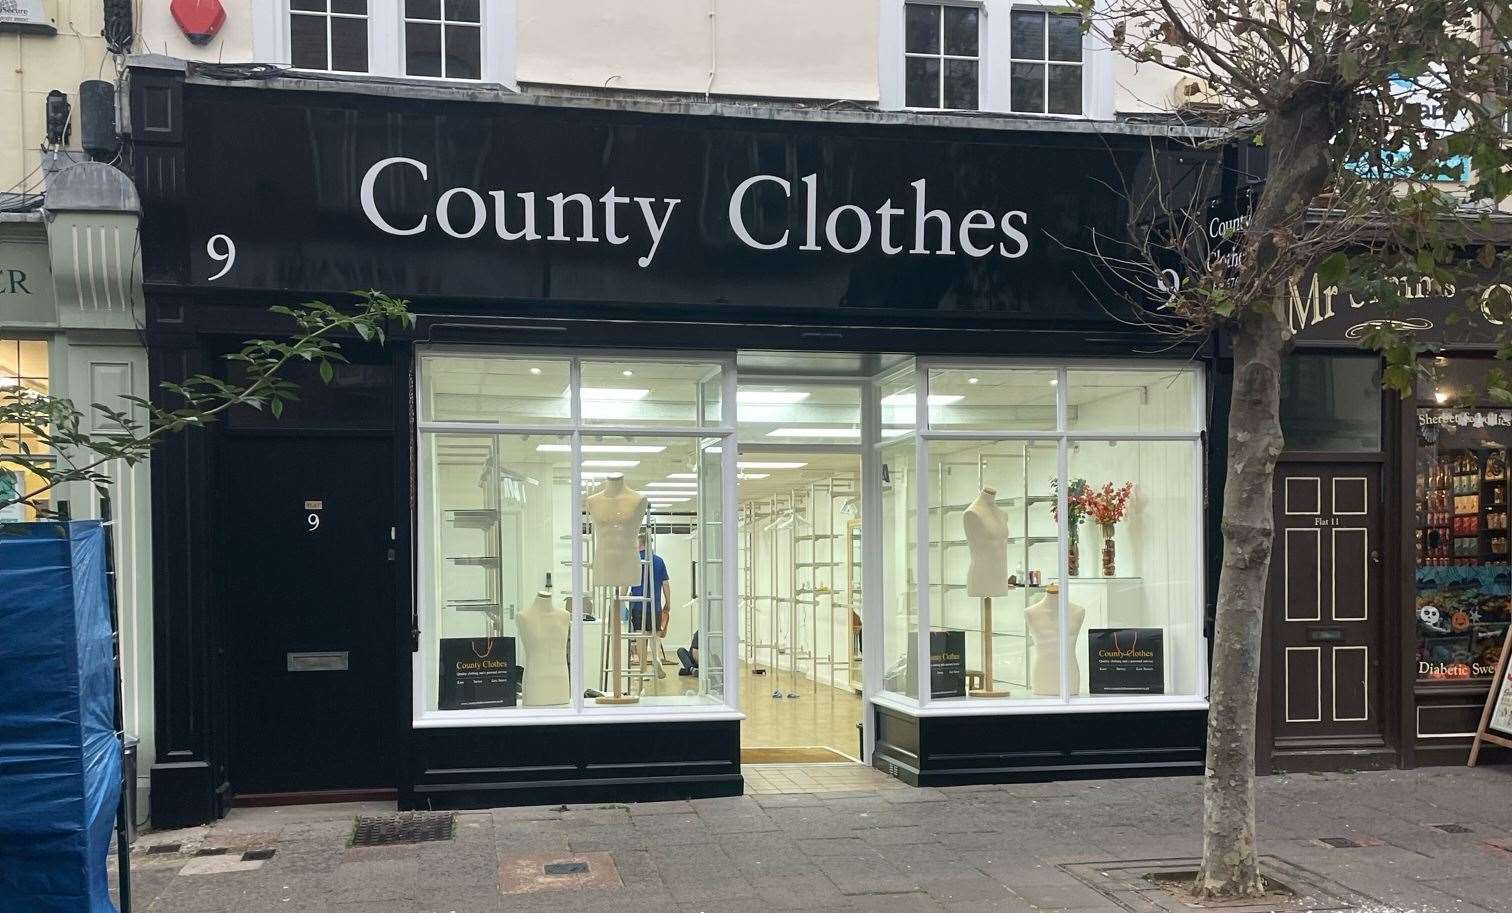 County Clothes has filled the former Roger’s Menswear unit in Herne Bay